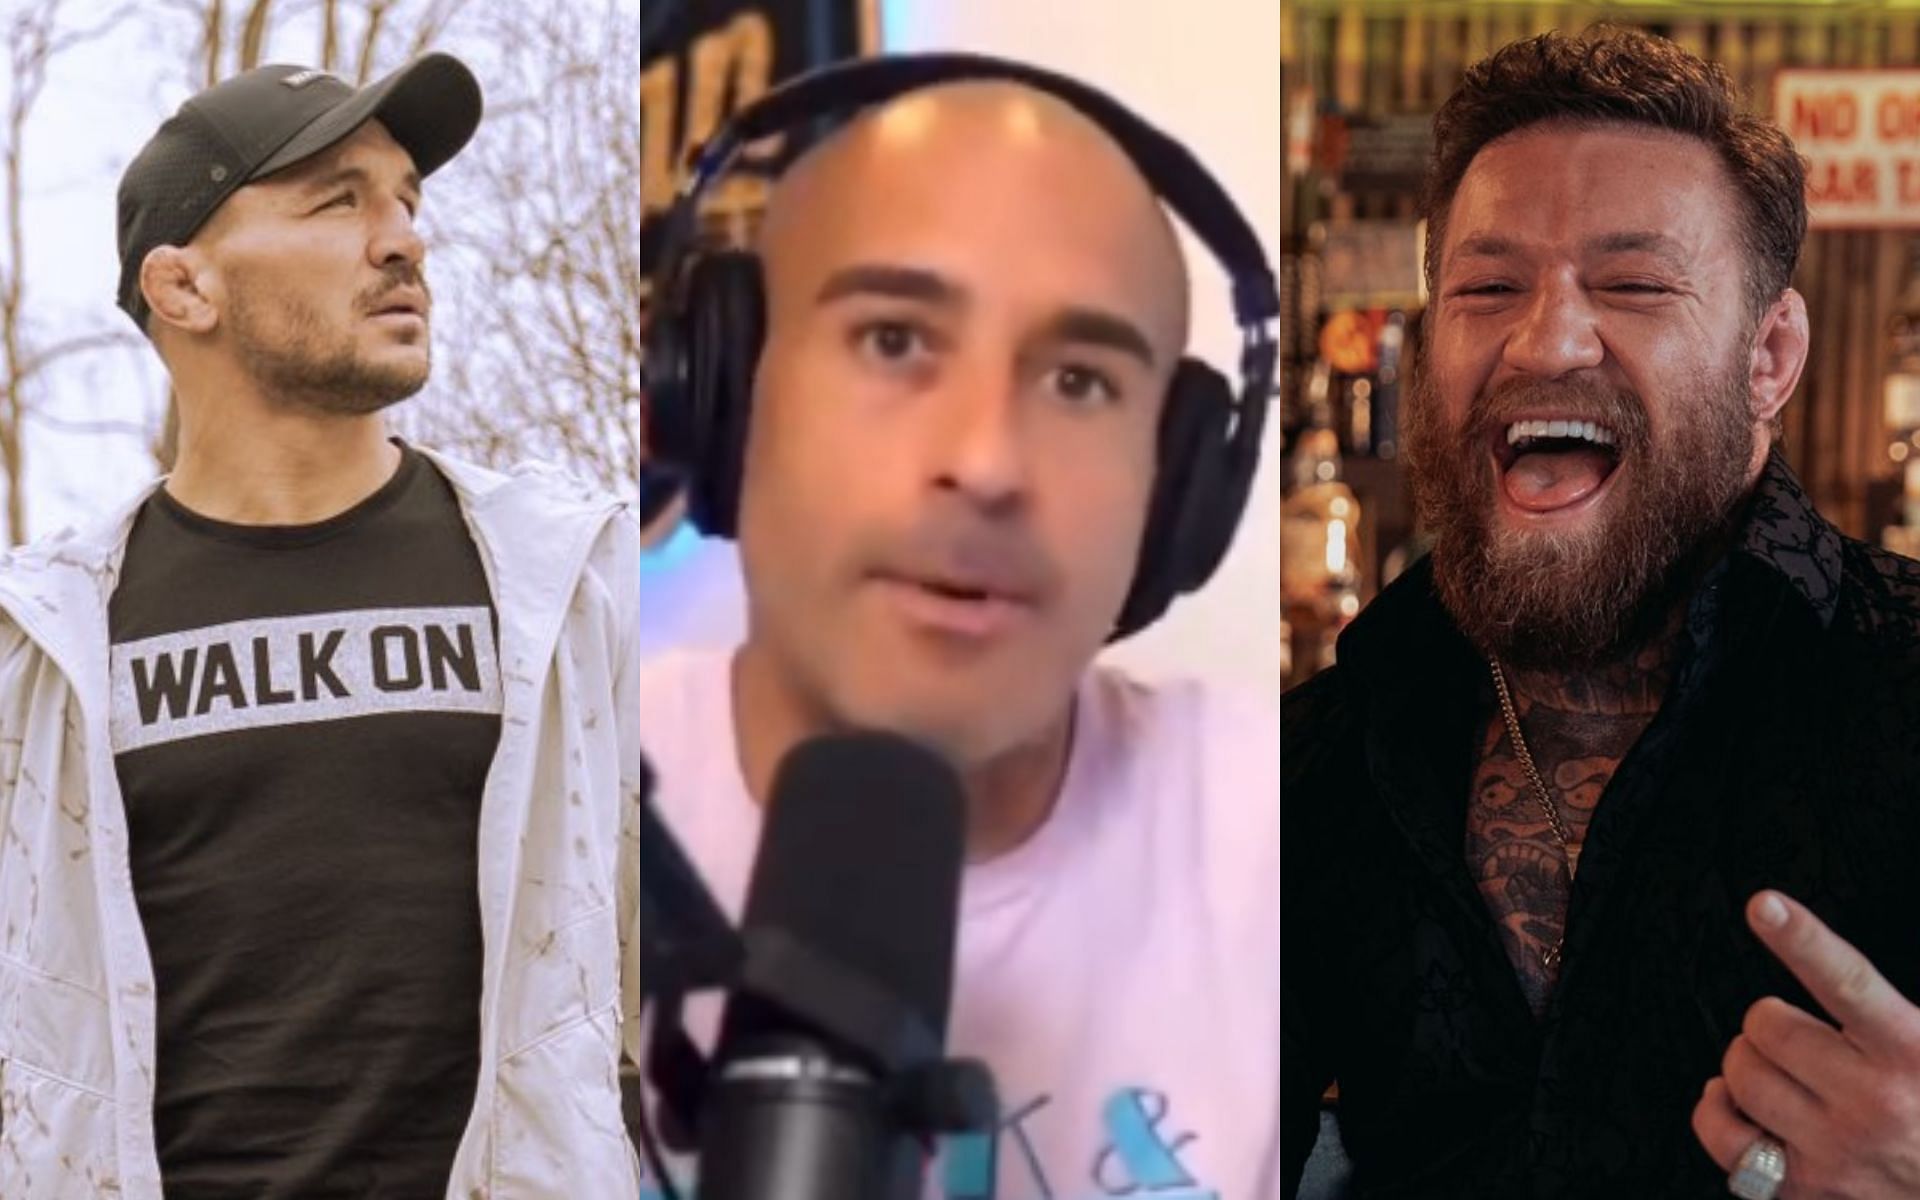 Jon Anik [Middle] reacted to Conor McGregor